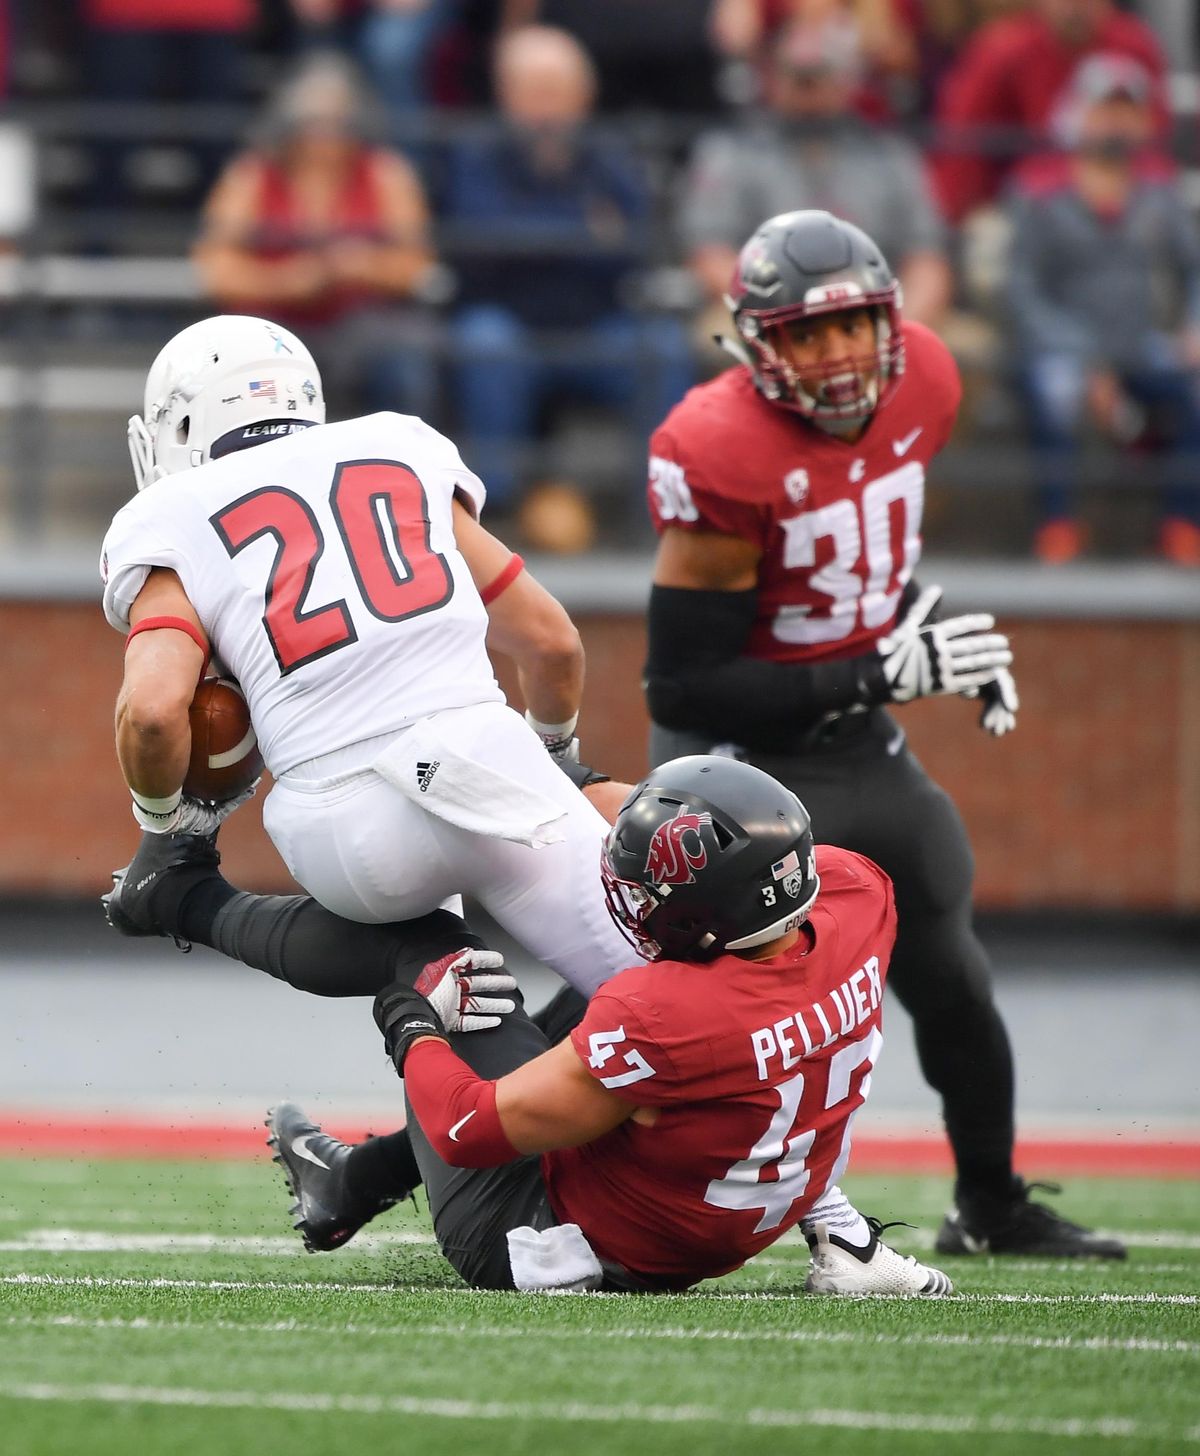 Washington State Cougars linebacker Peyton Pelluer (47) brings down Eastern Washington Eagles running back Sam McPherson (20) during the first half of a college football game on Saturday, September 15, 2018, at Martin Stadium in Pullman, Wash. (Tyler Tjomsland / The Spokesman-Review)